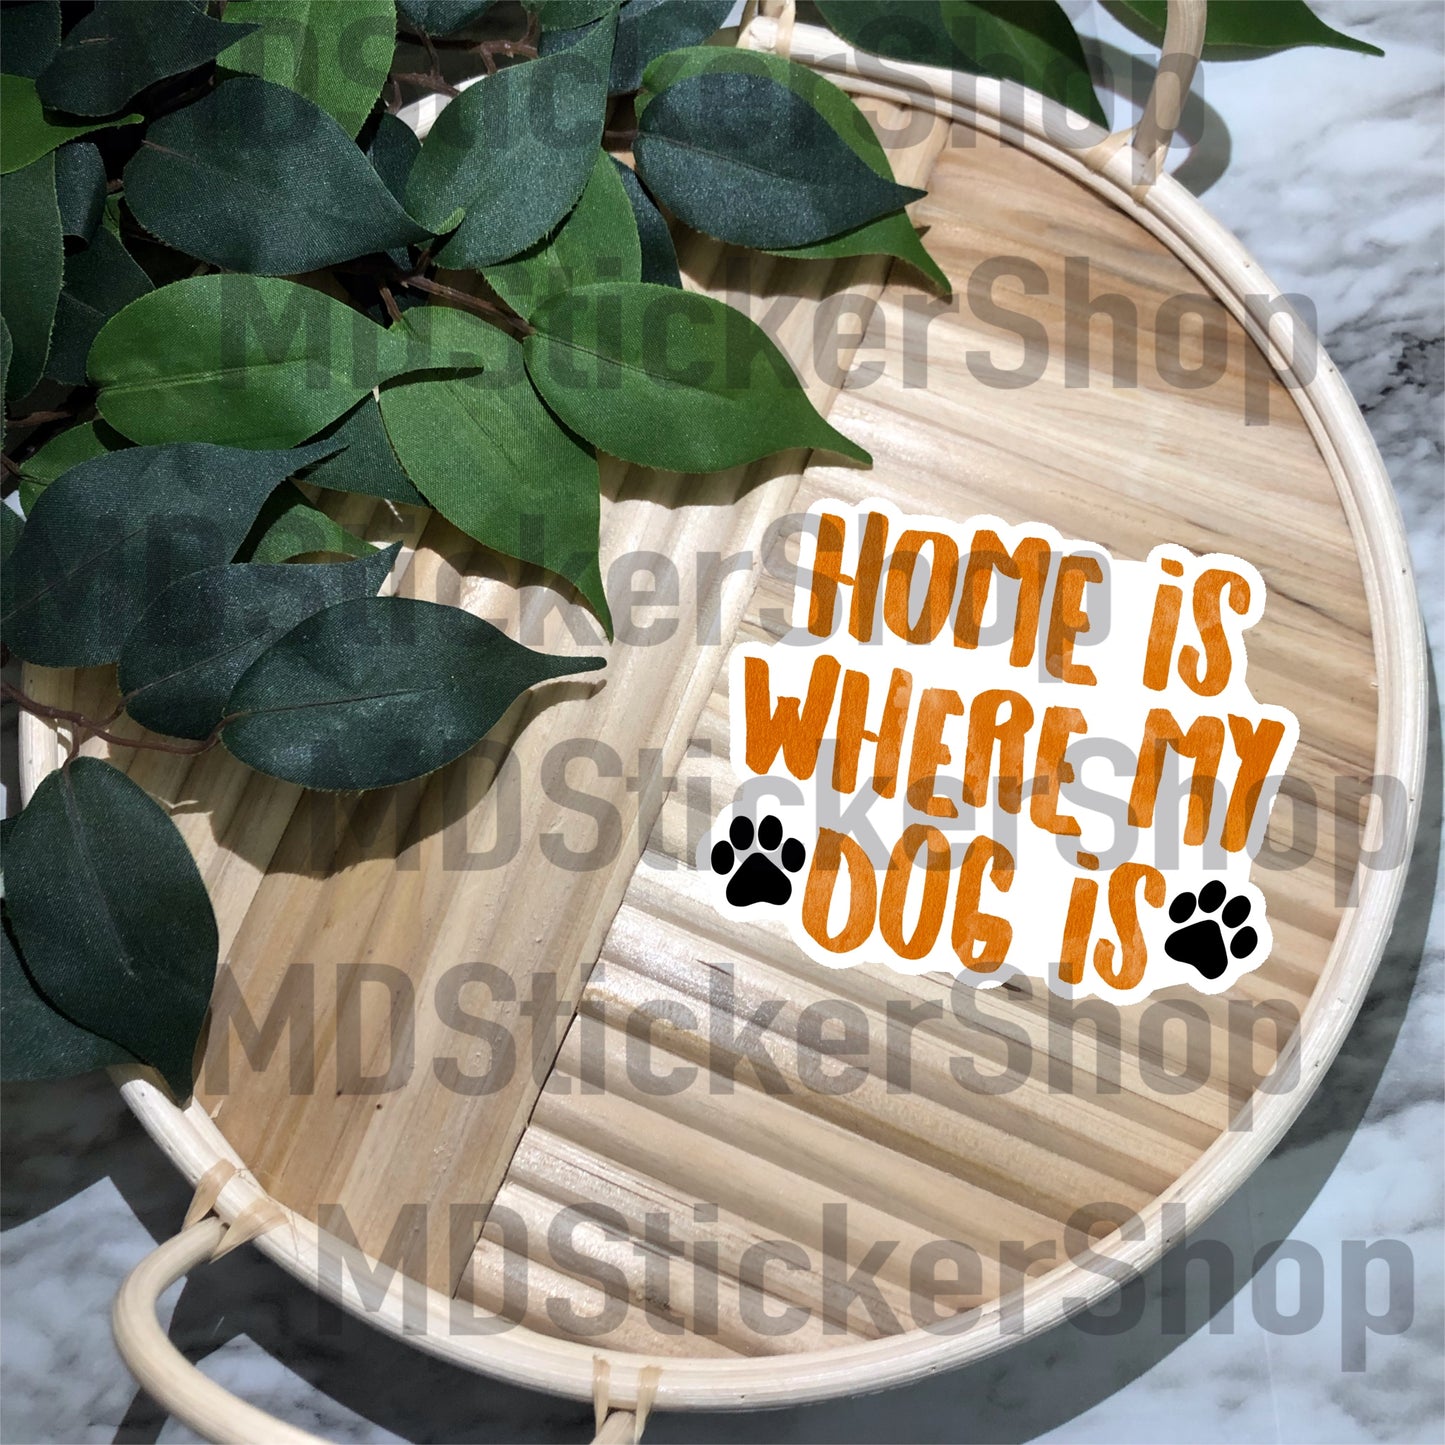 Home Is Where My Dog Is Vinyl Sticker